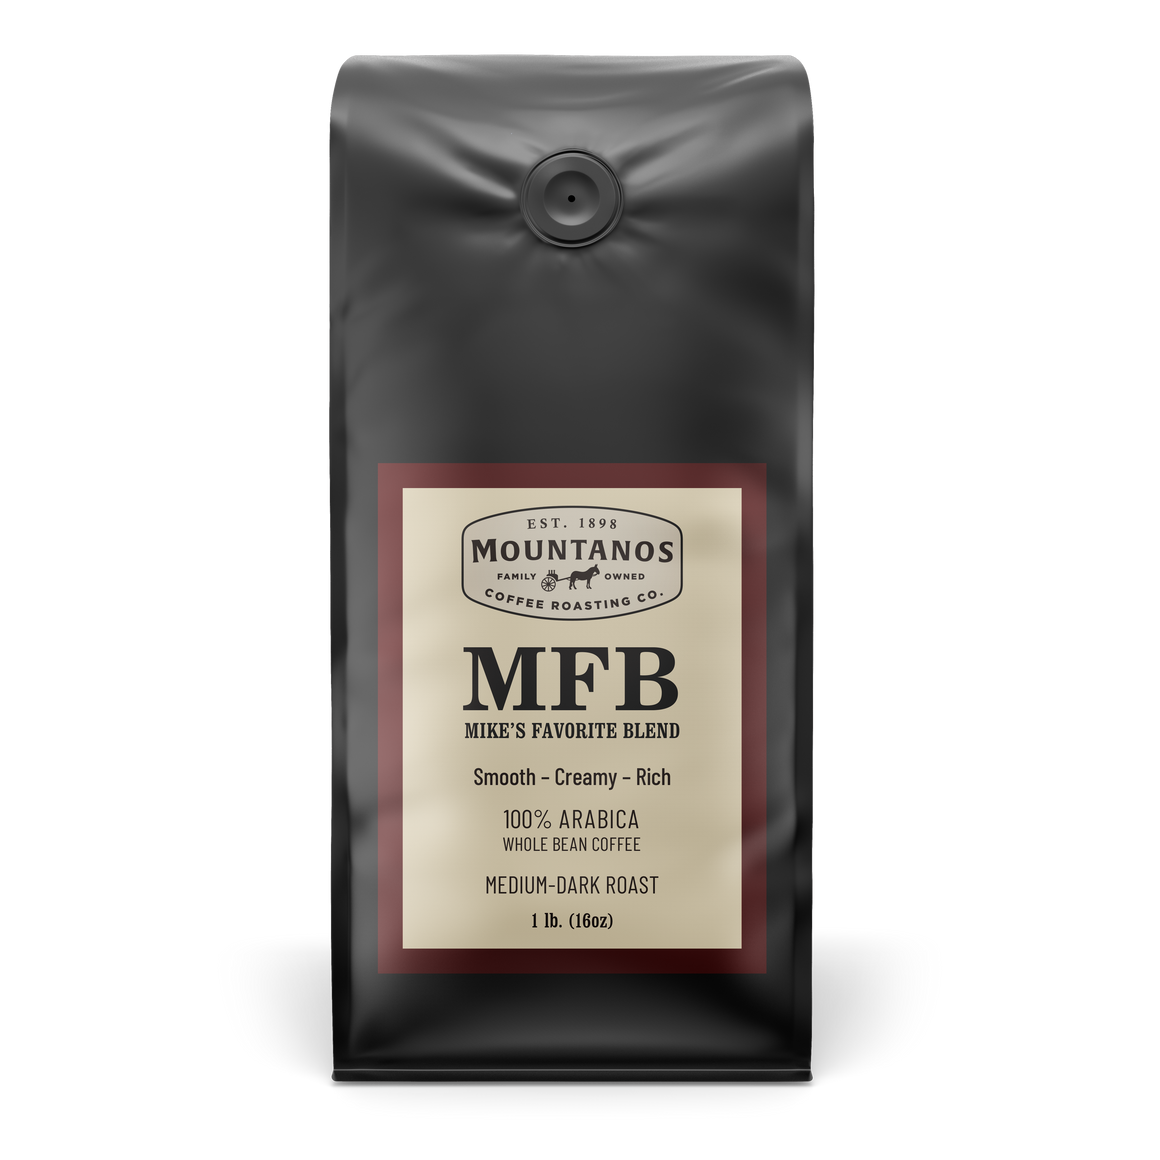 MFB – Mike’s Favorite Blend, by Mountanos Coffee Roasting Co.